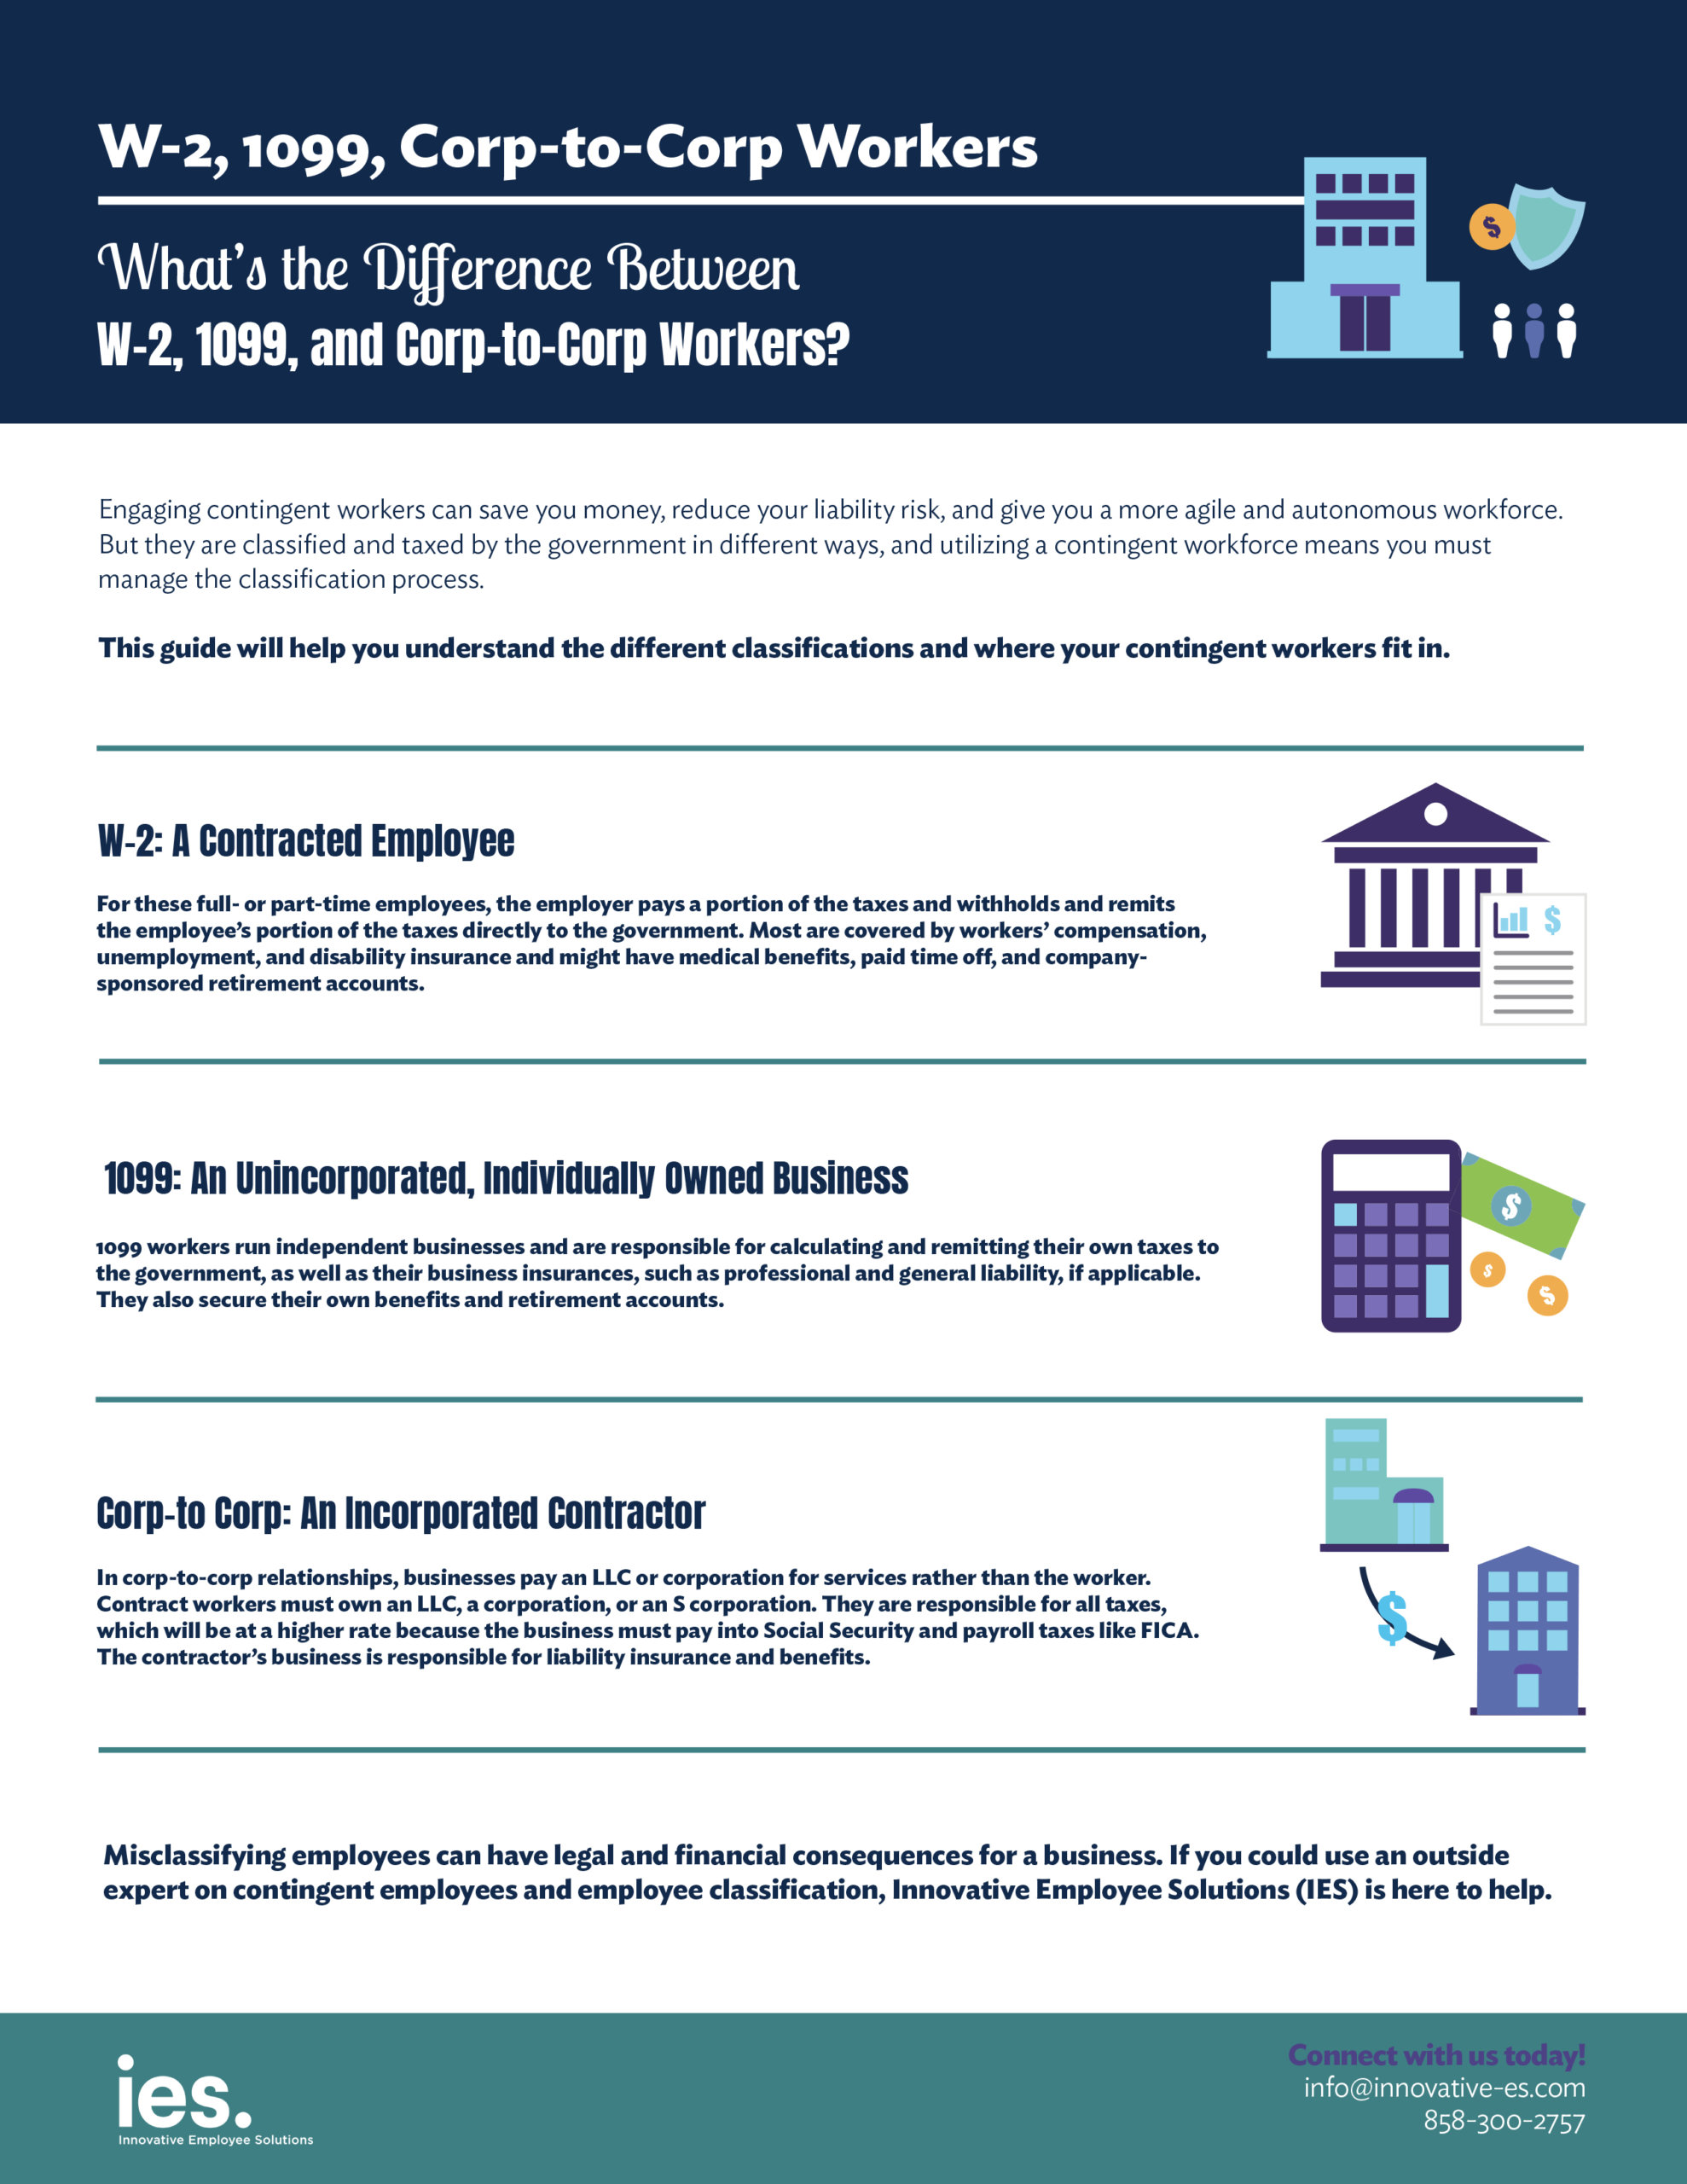 IES Infographic - Difference Between W2 1099 and Corp-to-Corp Workers